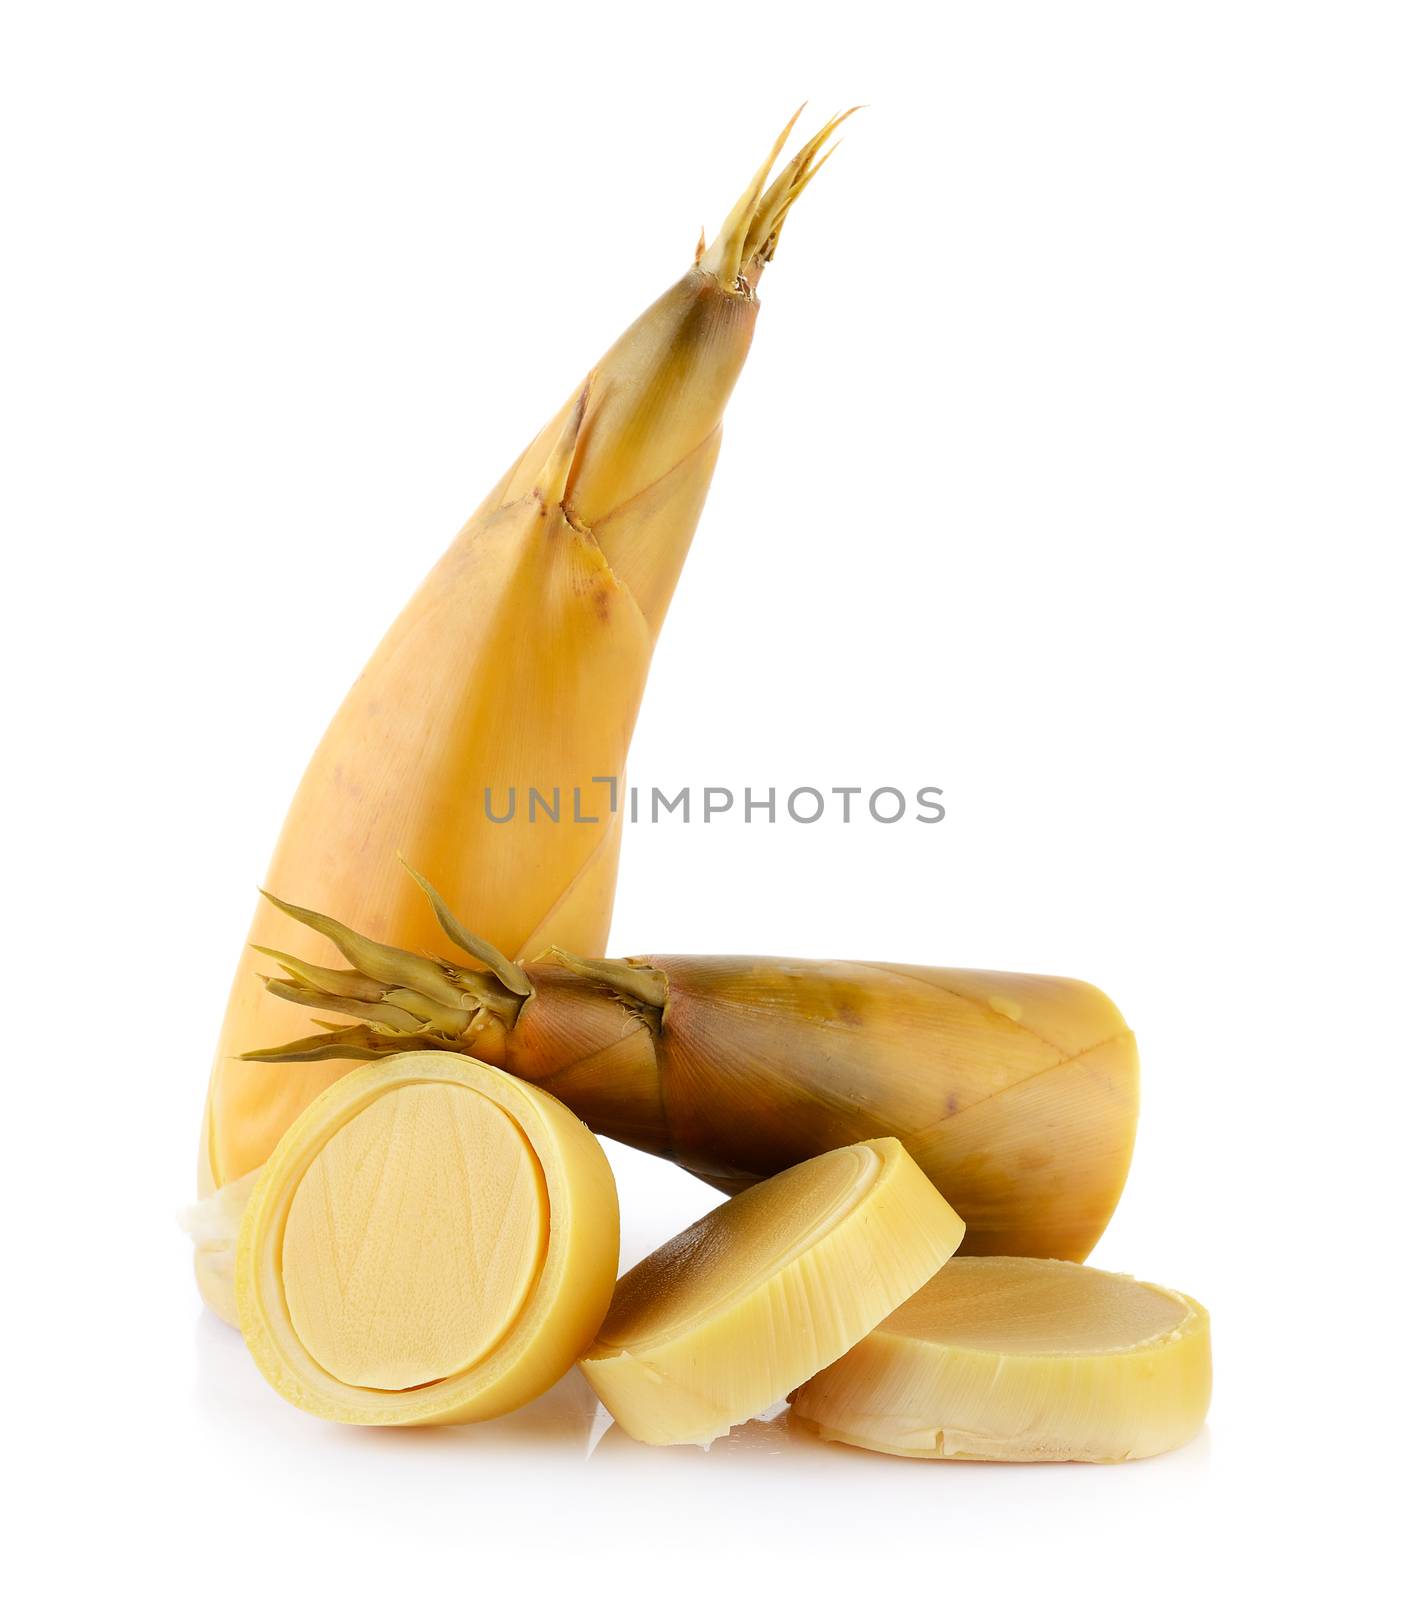 Bamboo shoots on white background by sommai